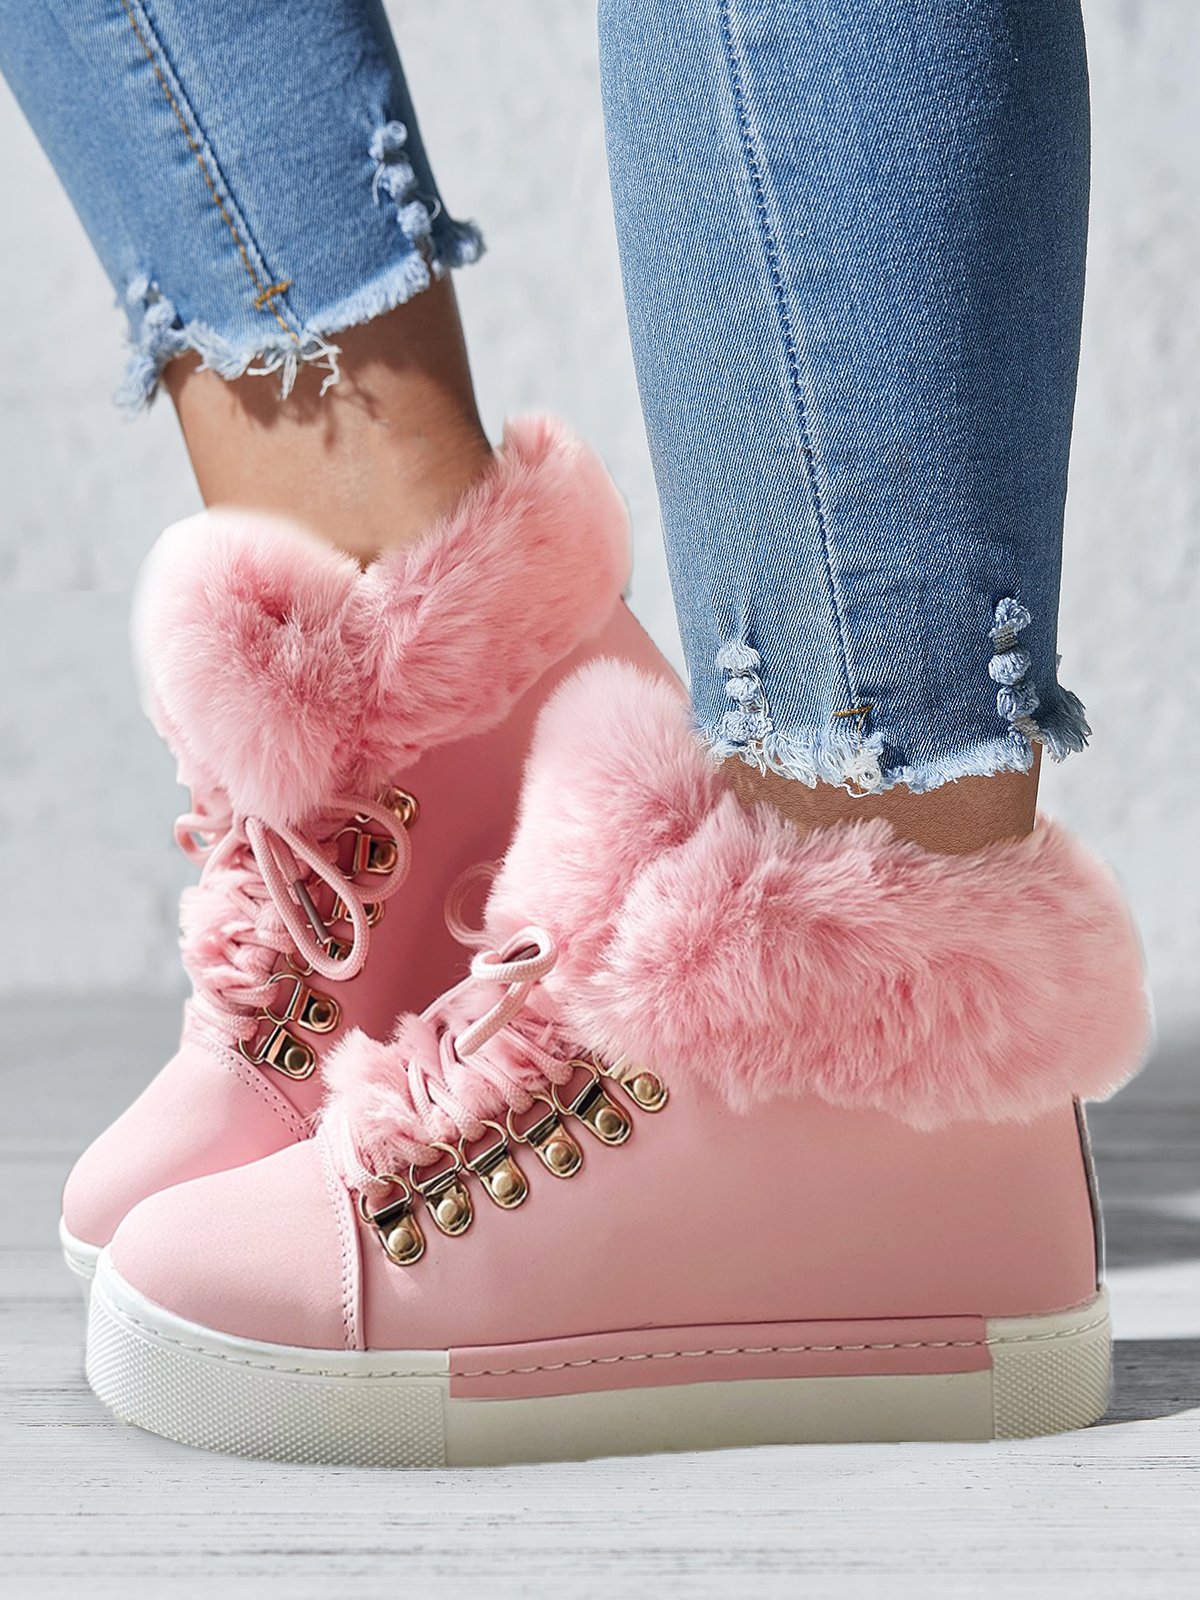 Casual Plain Wearable Lace-Up Flat Heel Snow Boots Split Joint